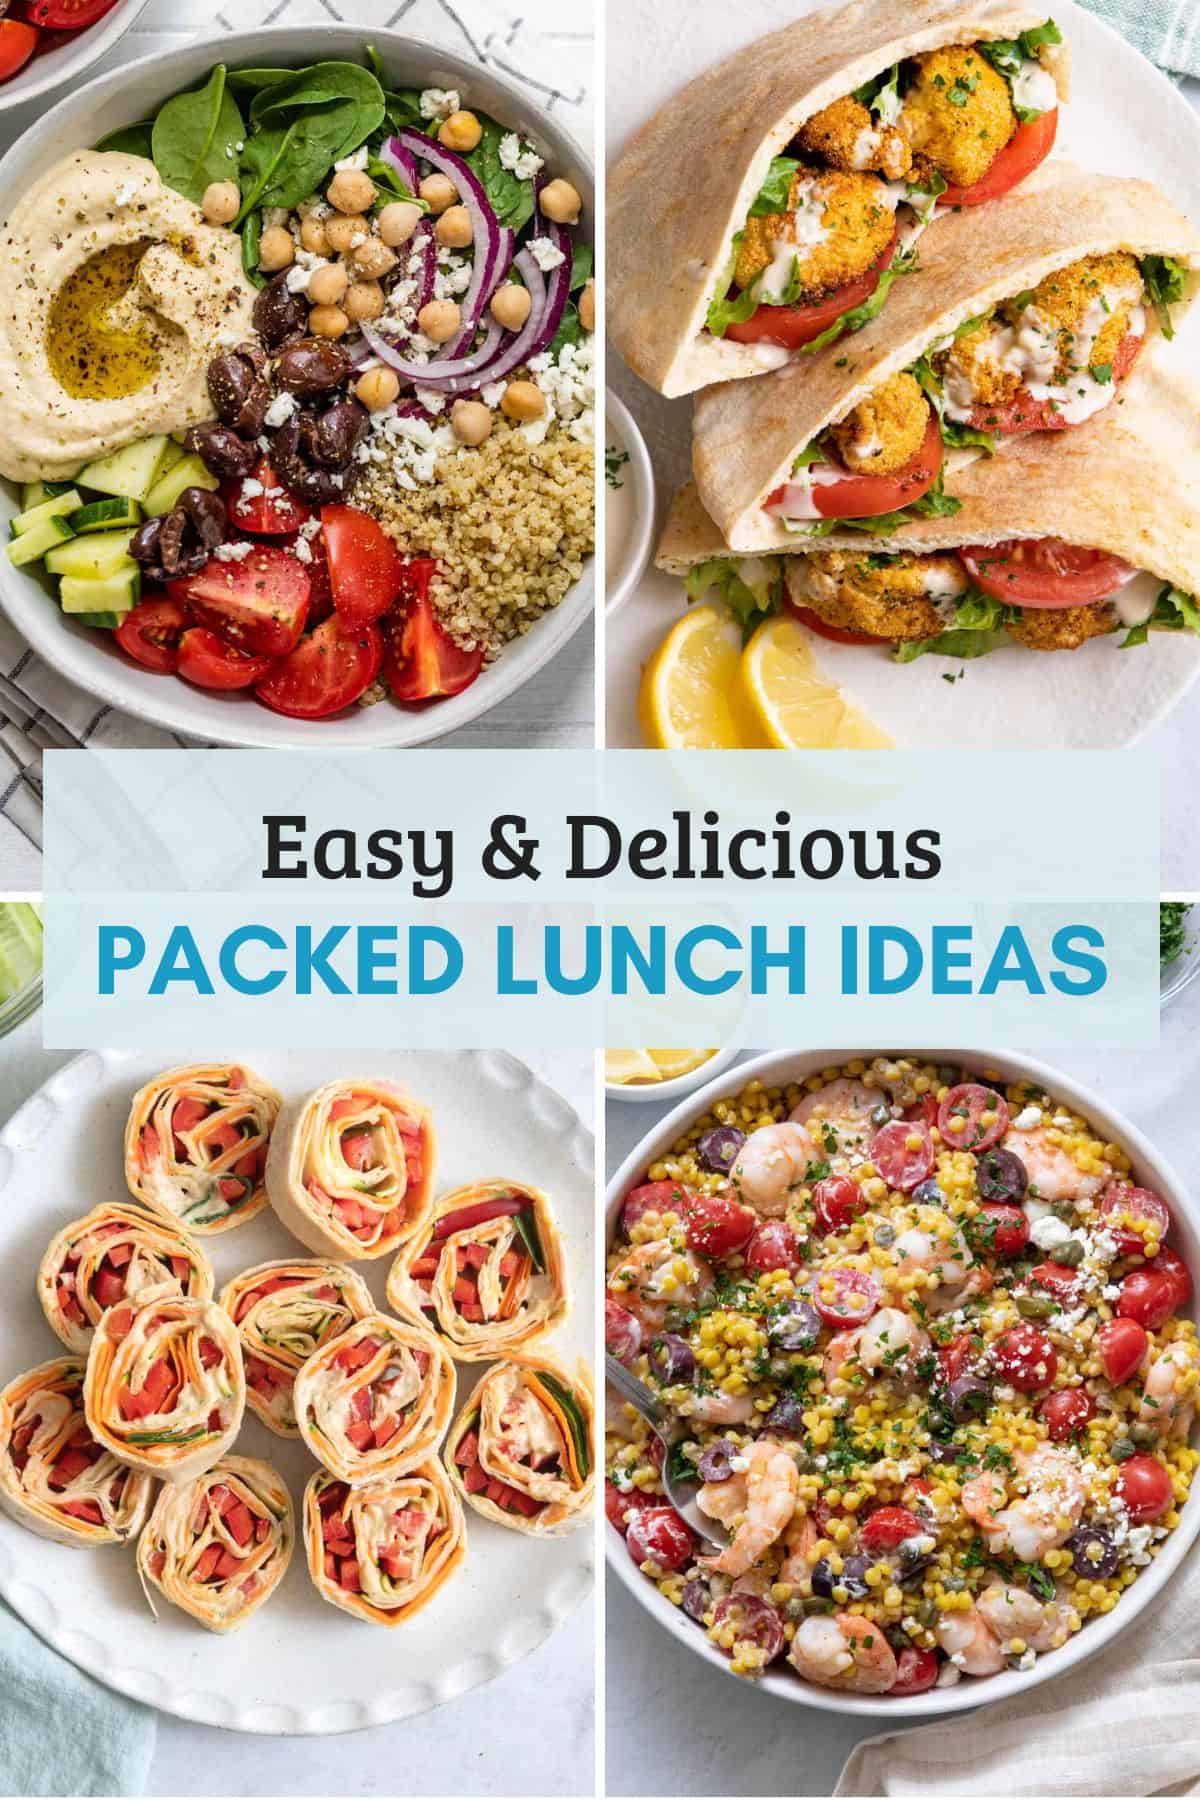 Easy and delicious packed lunch ideas.